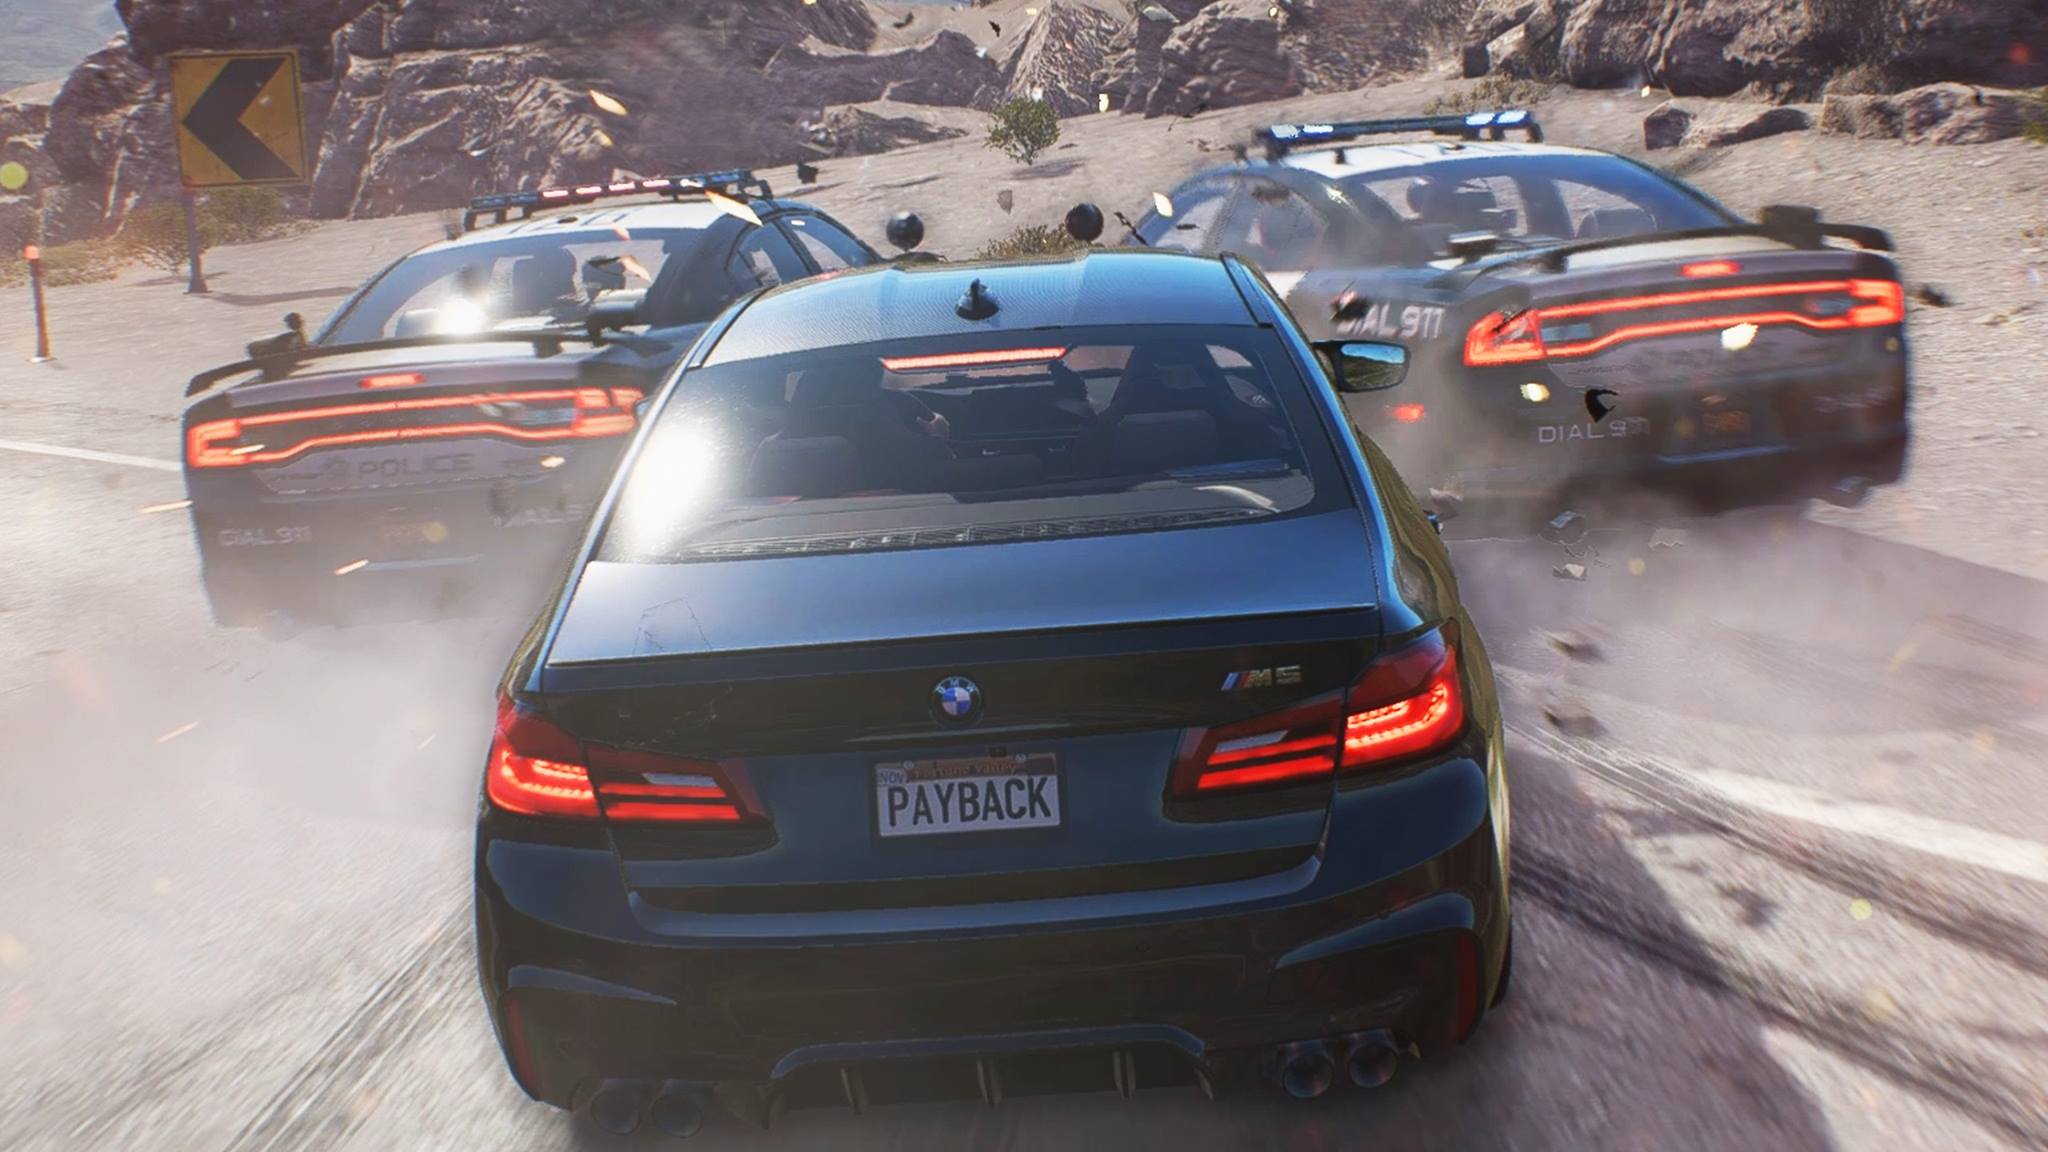 Nfs payback ps4. Need for Speed Payback (ps4). NFS Payback геймплей. Нфс пайбек на пс4.